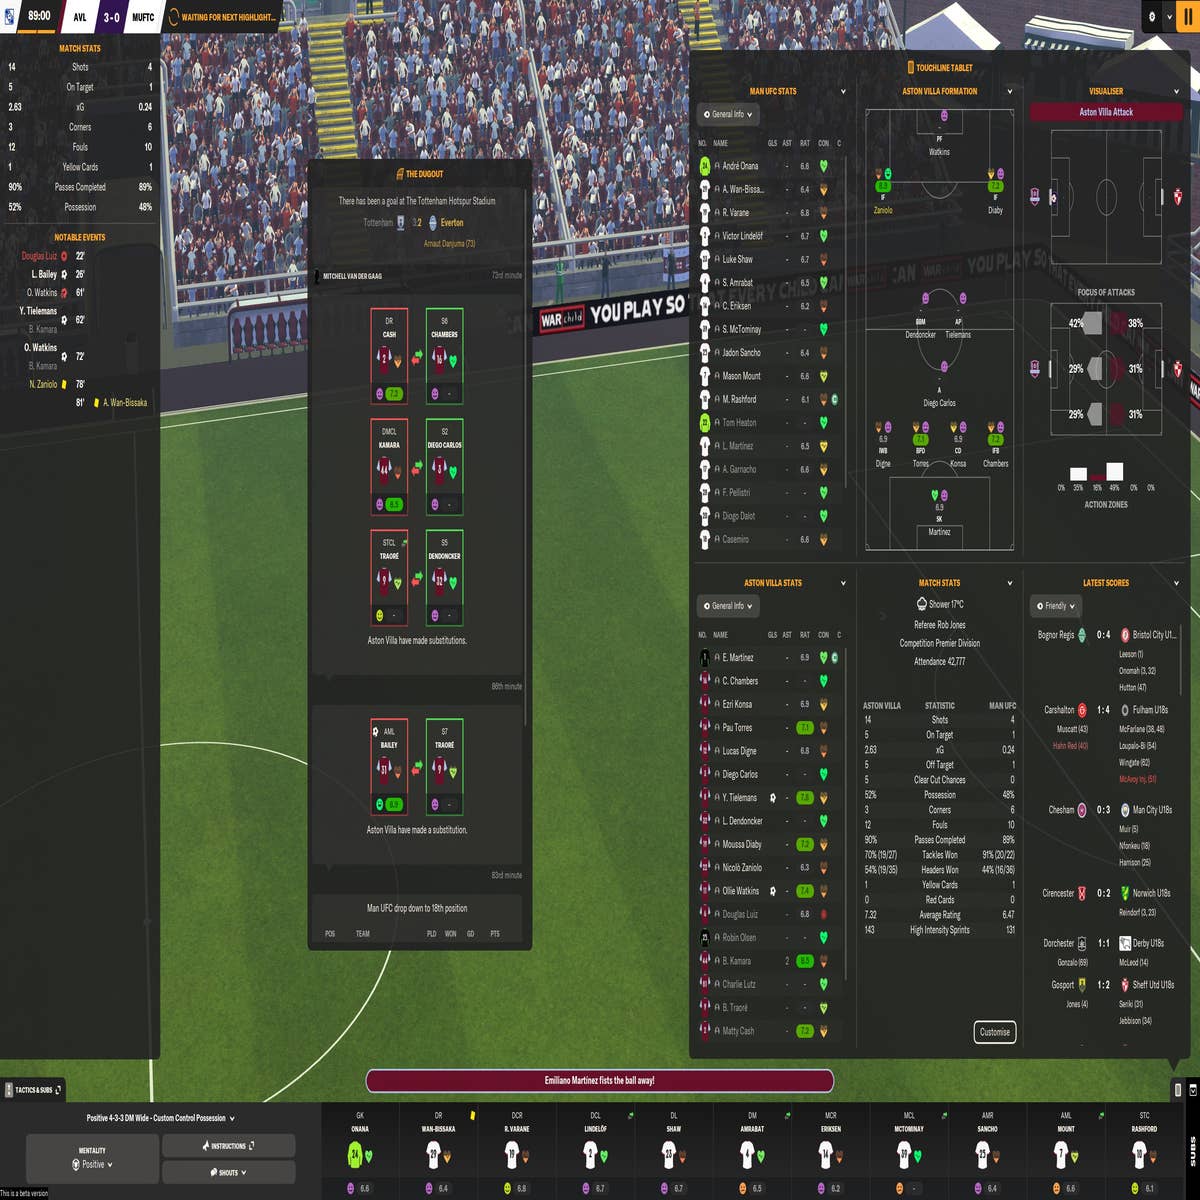 Football Manager 2024 (Steam) - Review